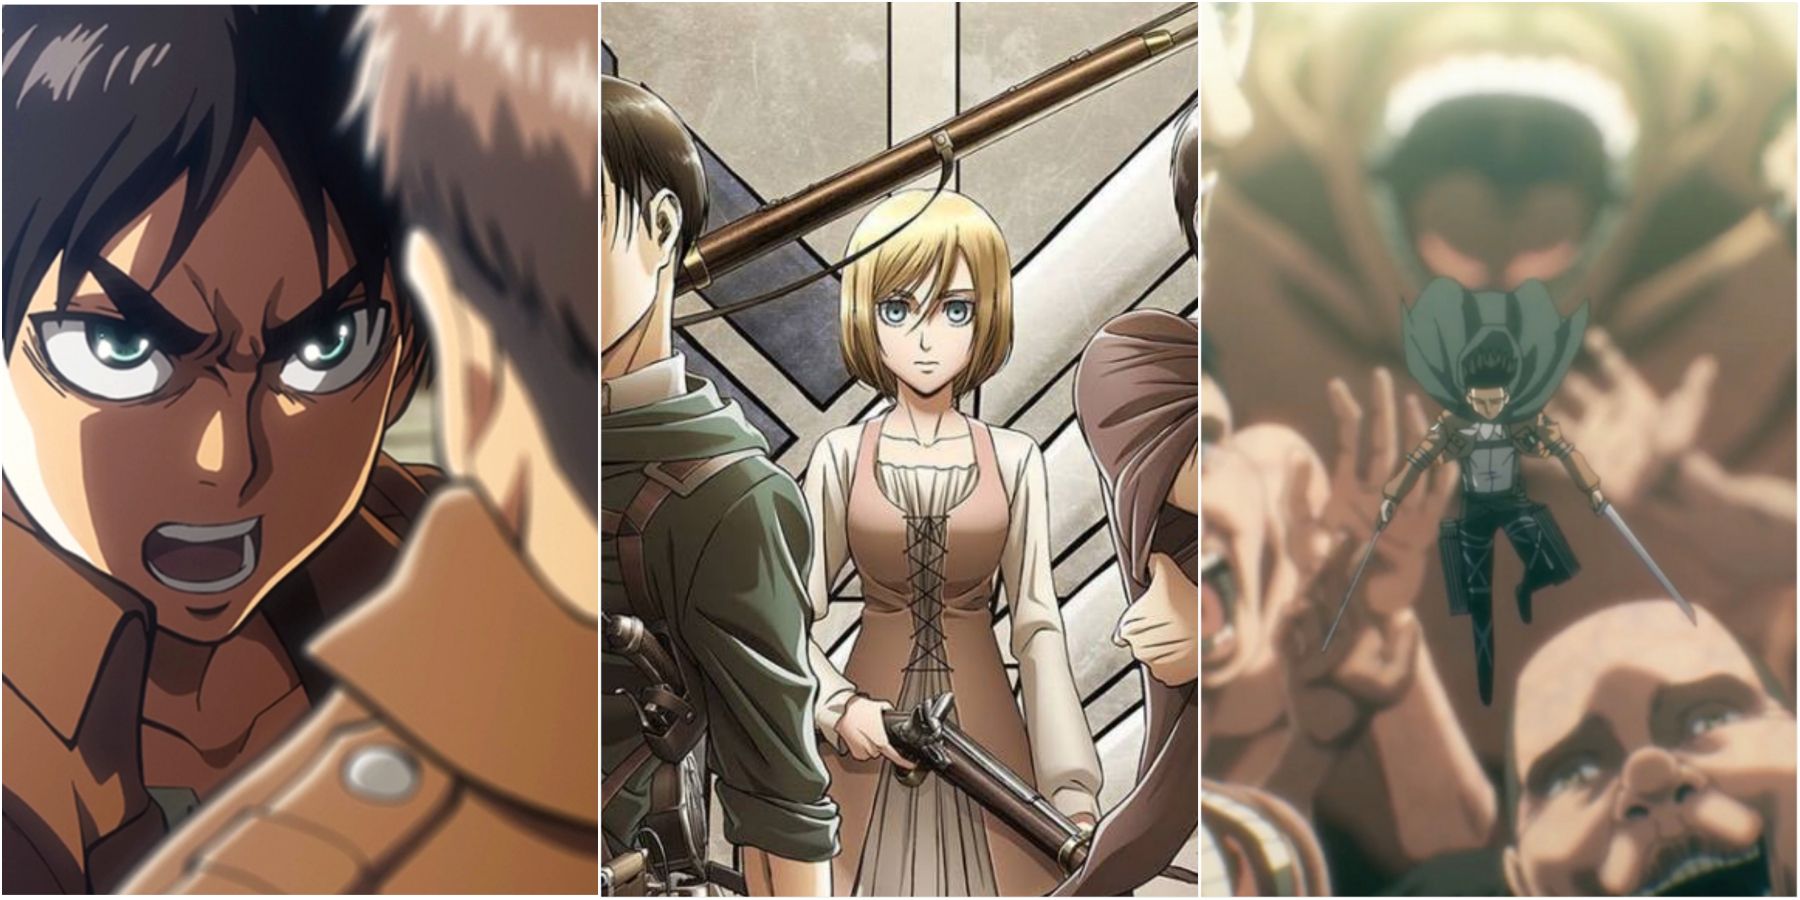 Why did Attack on Titan anime change Studios? Explained